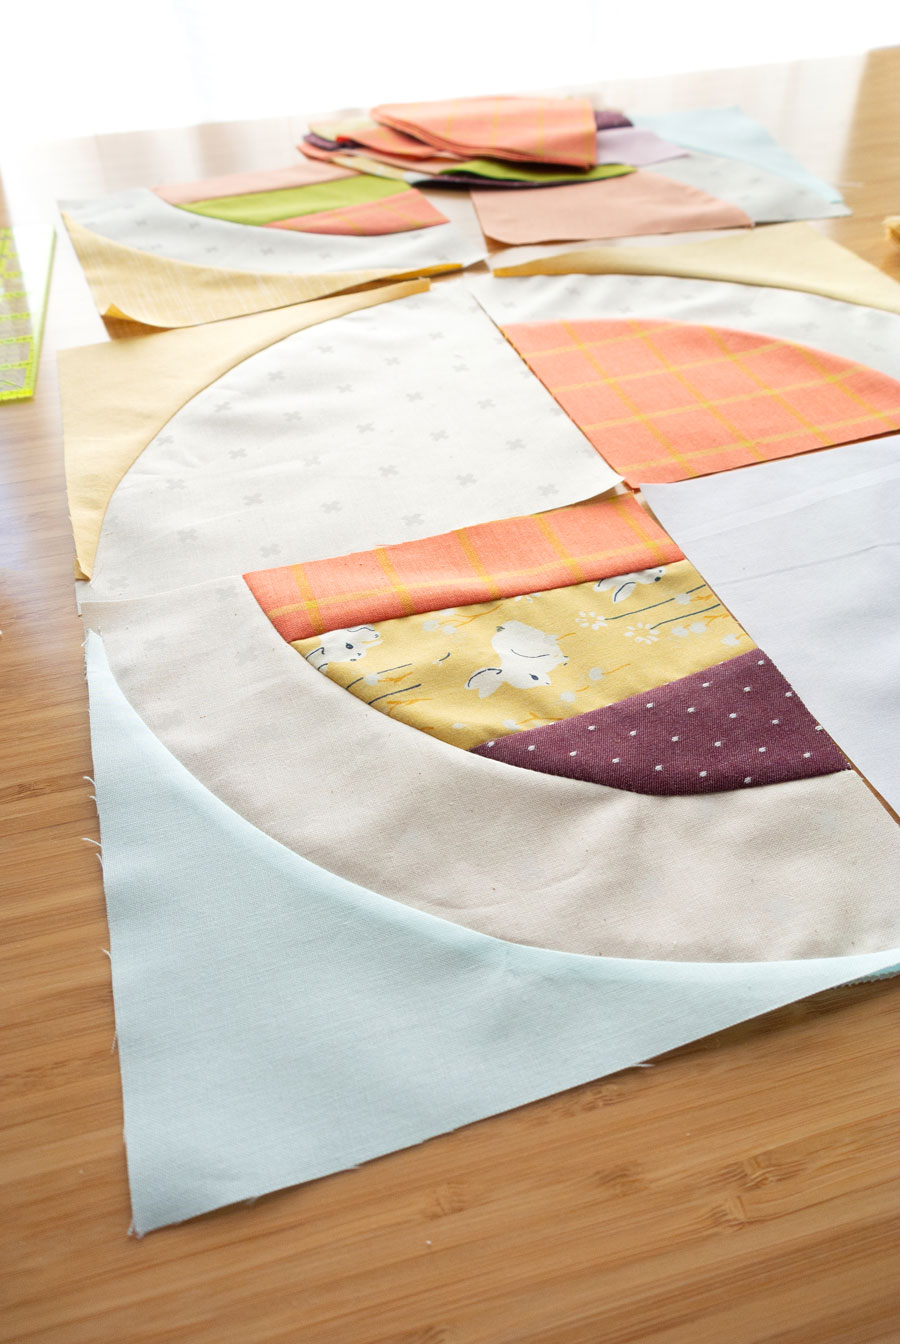 Join the Modern Fans quilt pattern sew-along for a chance to win a BERNINA 350 sewing machine along with other amazing prizes!